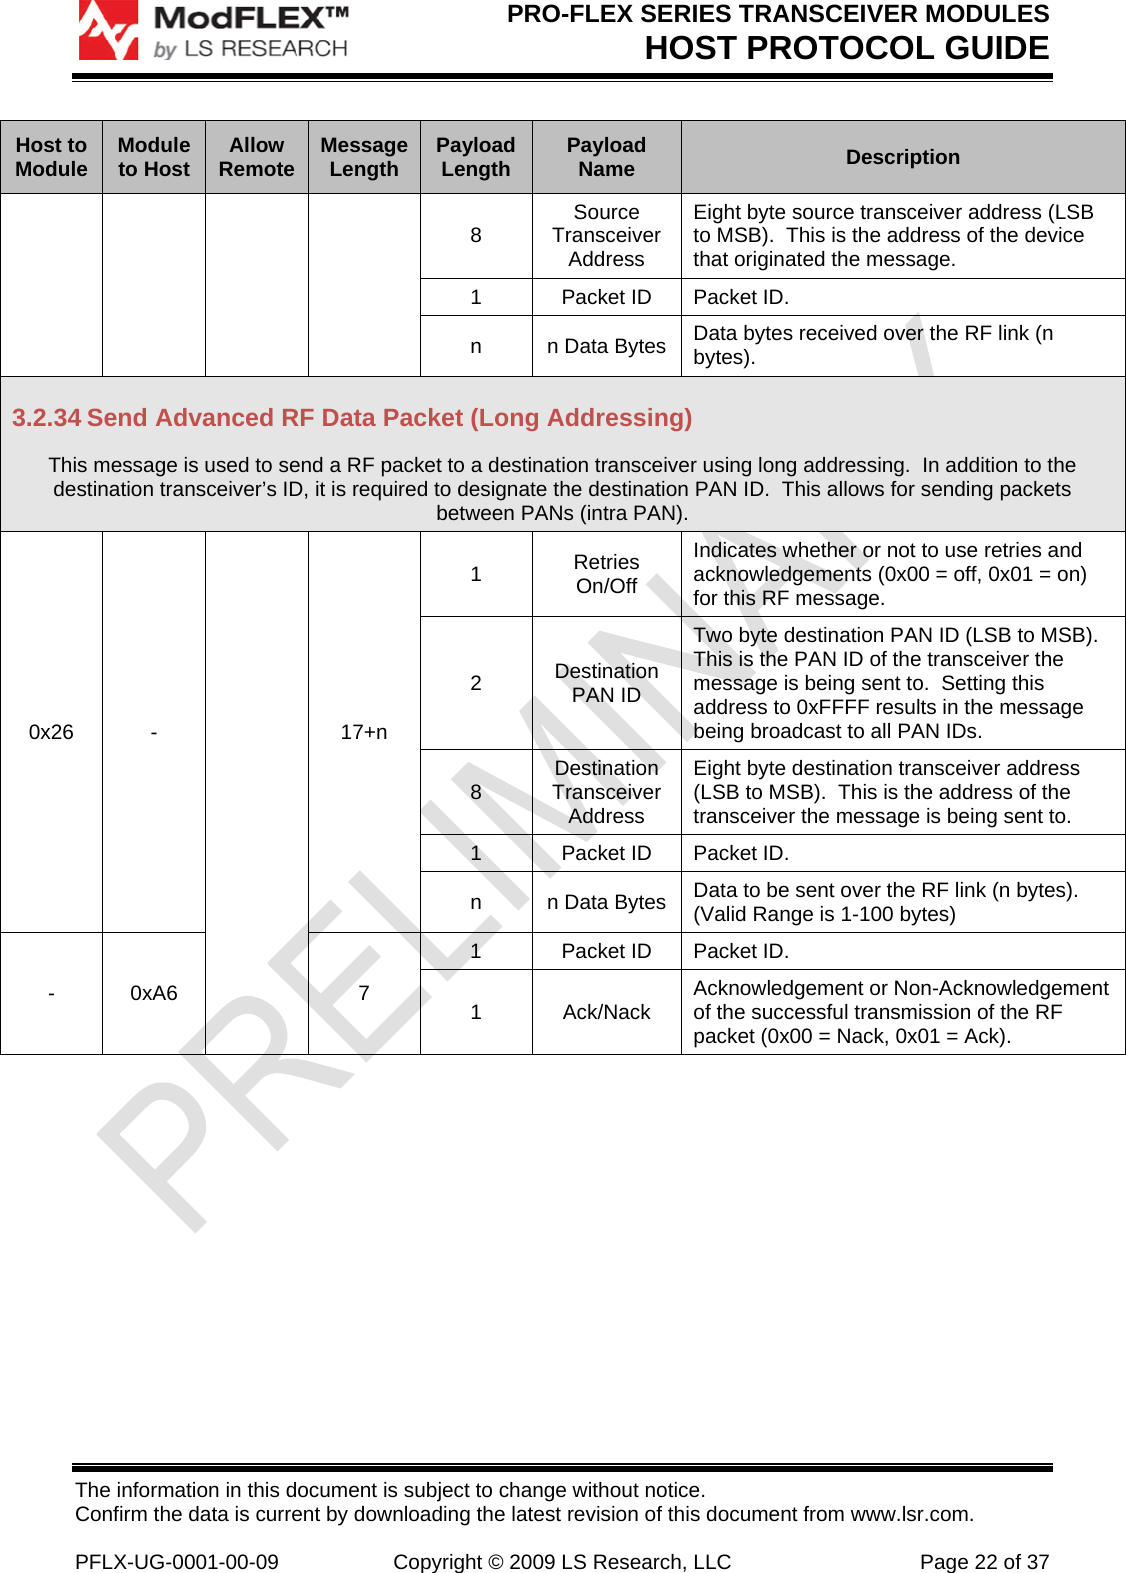 PRO-FLEX SERIES TRANSCEIVER MODULES HOST PROTOCOL GUIDE The information in this document is subject to change without notice. Confirm the data is current by downloading the latest revision of this document from www.lsr.com.  PFLX-UG-0001-00-09  Copyright © 2009 LS Research, LLC  Page 22 of 37 Host to Module  Module to Host  Allow Remote  Message Length  Payload Length  Payload Name  Description 8  Source Transceiver Address Eight byte source transceiver address (LSB to MSB).  This is the address of the device that originated the message. 1  Packet ID  Packet ID. n  n Data Bytes  Data bytes received over the RF link (n bytes). 3.2.34 Send Advanced RF Data Packet (Long Addressing) This message is used to send a RF packet to a destination transceiver using long addressing.  In addition to the destination transceiver’s ID, it is required to designate the destination PAN ID.  This allows for sending packets between PANs (intra PAN). 0x26 -  17+n 1  Retries On/Off Indicates whether or not to use retries and acknowledgements (0x00 = off, 0x01 = on) for this RF message. 2  Destination PAN ID Two byte destination PAN ID (LSB to MSB).  This is the PAN ID of the transceiver the message is being sent to.  Setting this address to 0xFFFF results in the message being broadcast to all PAN IDs. 8  Destination Transceiver Address Eight byte destination transceiver address (LSB to MSB).  This is the address of the transceiver the message is being sent to.   1  Packet ID  Packet ID. n  n Data Bytes  Data to be sent over the RF link (n bytes).  (Valid Range is 1-100 bytes) - 0xA6  7 1  Packet ID  Packet ID. 1 Ack/Nack Acknowledgement or Non-Acknowledgement of the successful transmission of the RF packet (0x00 = Nack, 0x01 = Ack). 